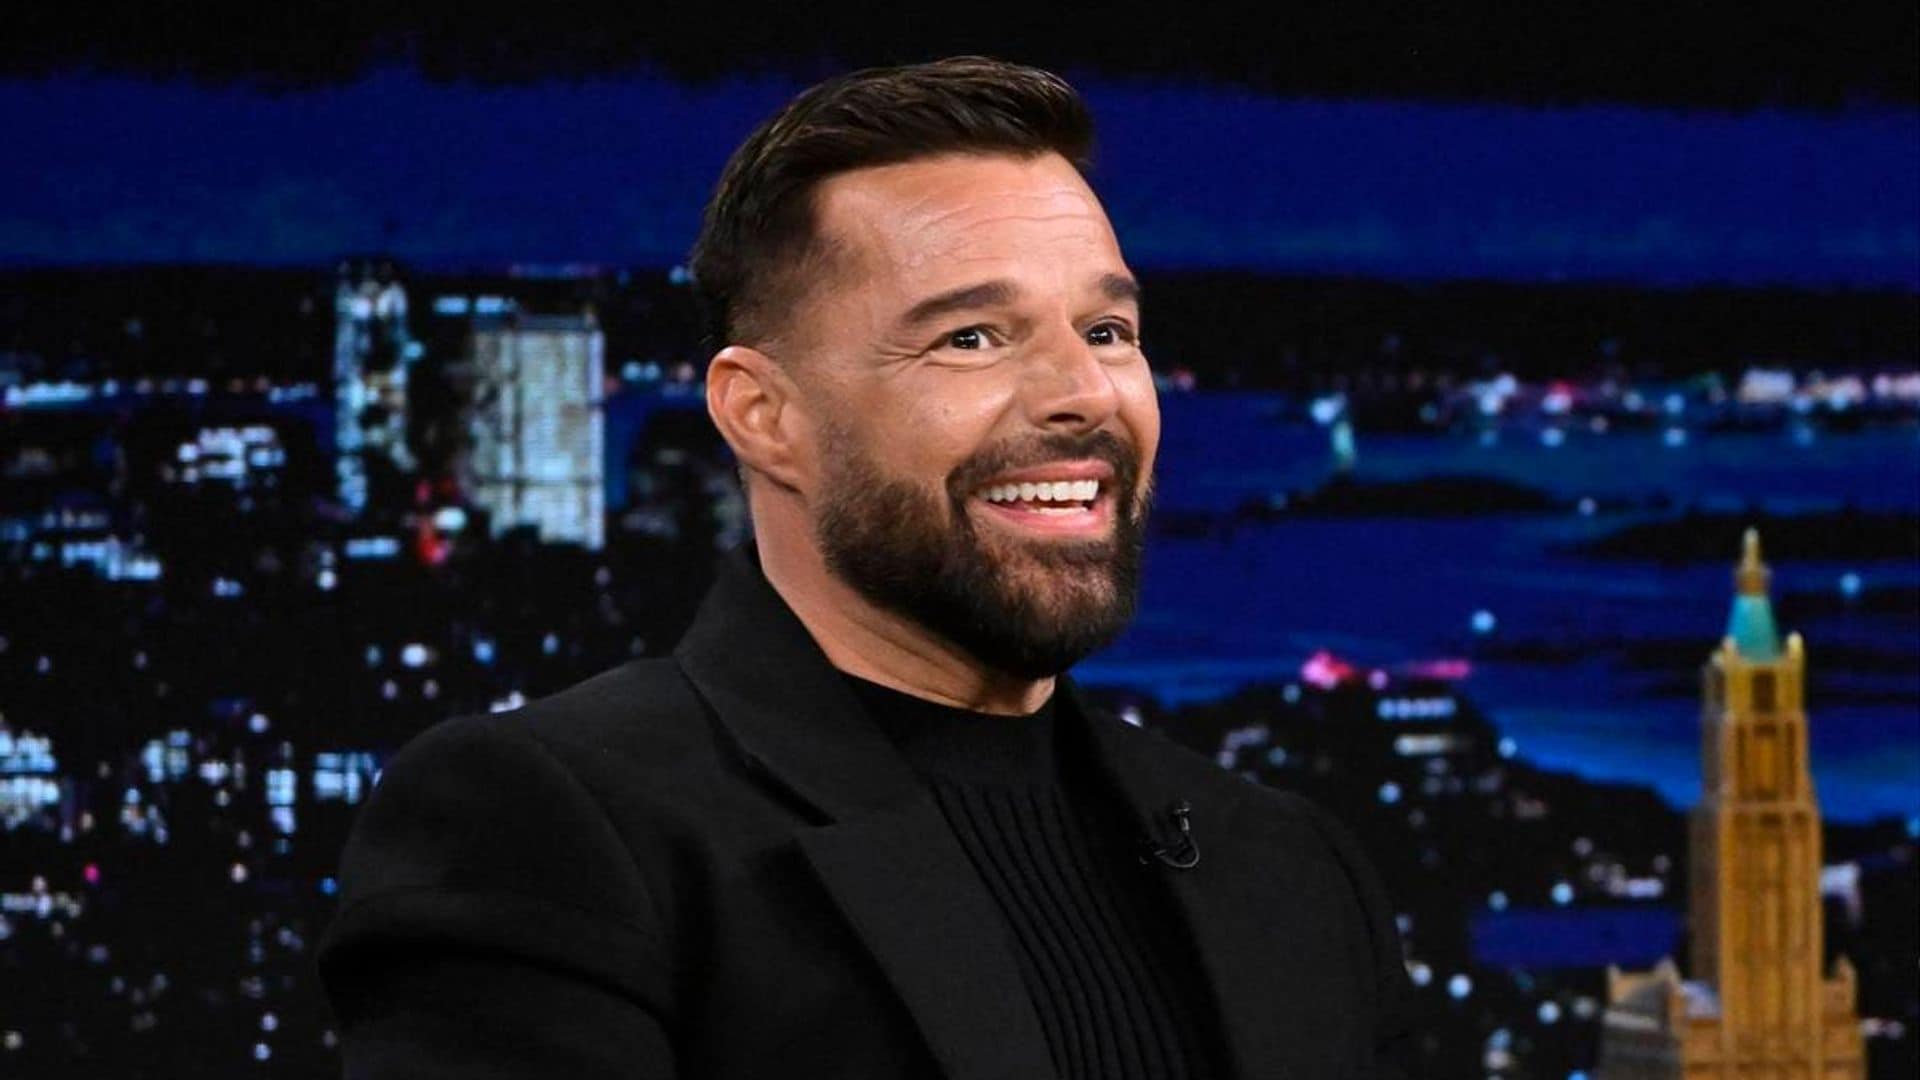 Ricky Martin secured his role in ‘Palm Royale’ after dancing with the show’s creator